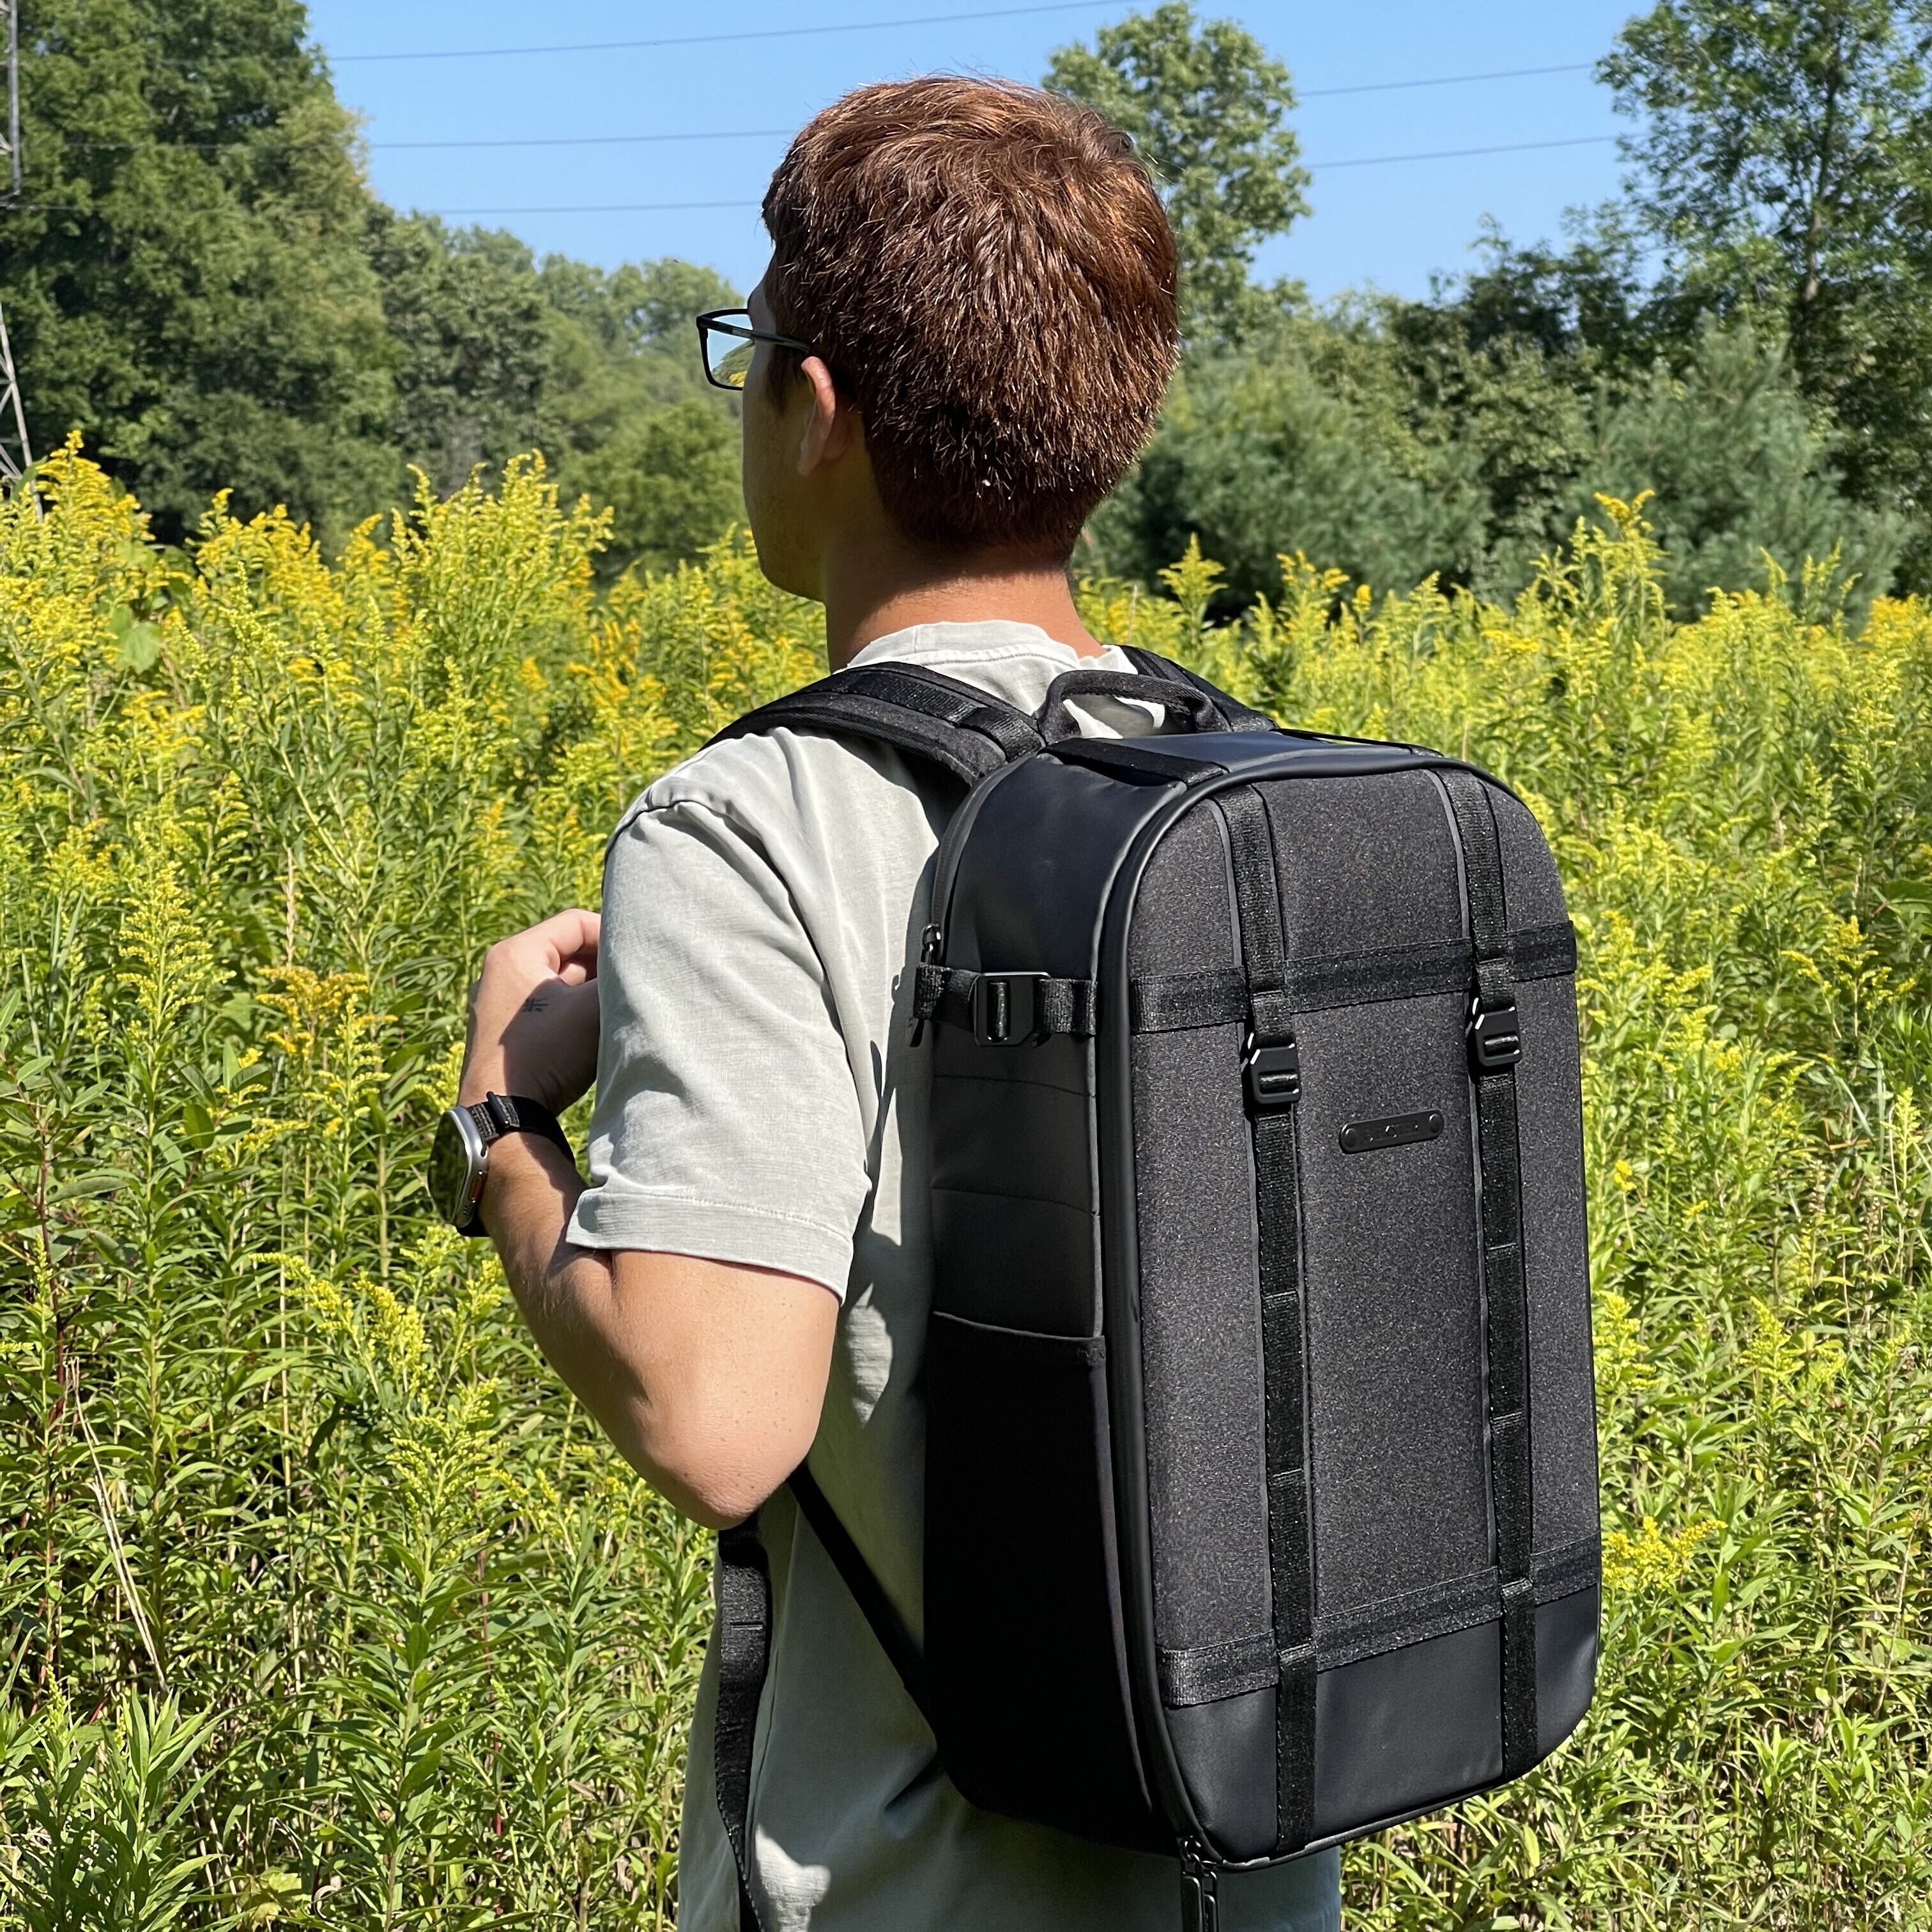 5 Reasons Why This Backpack Beats Your Regular Old Backpack